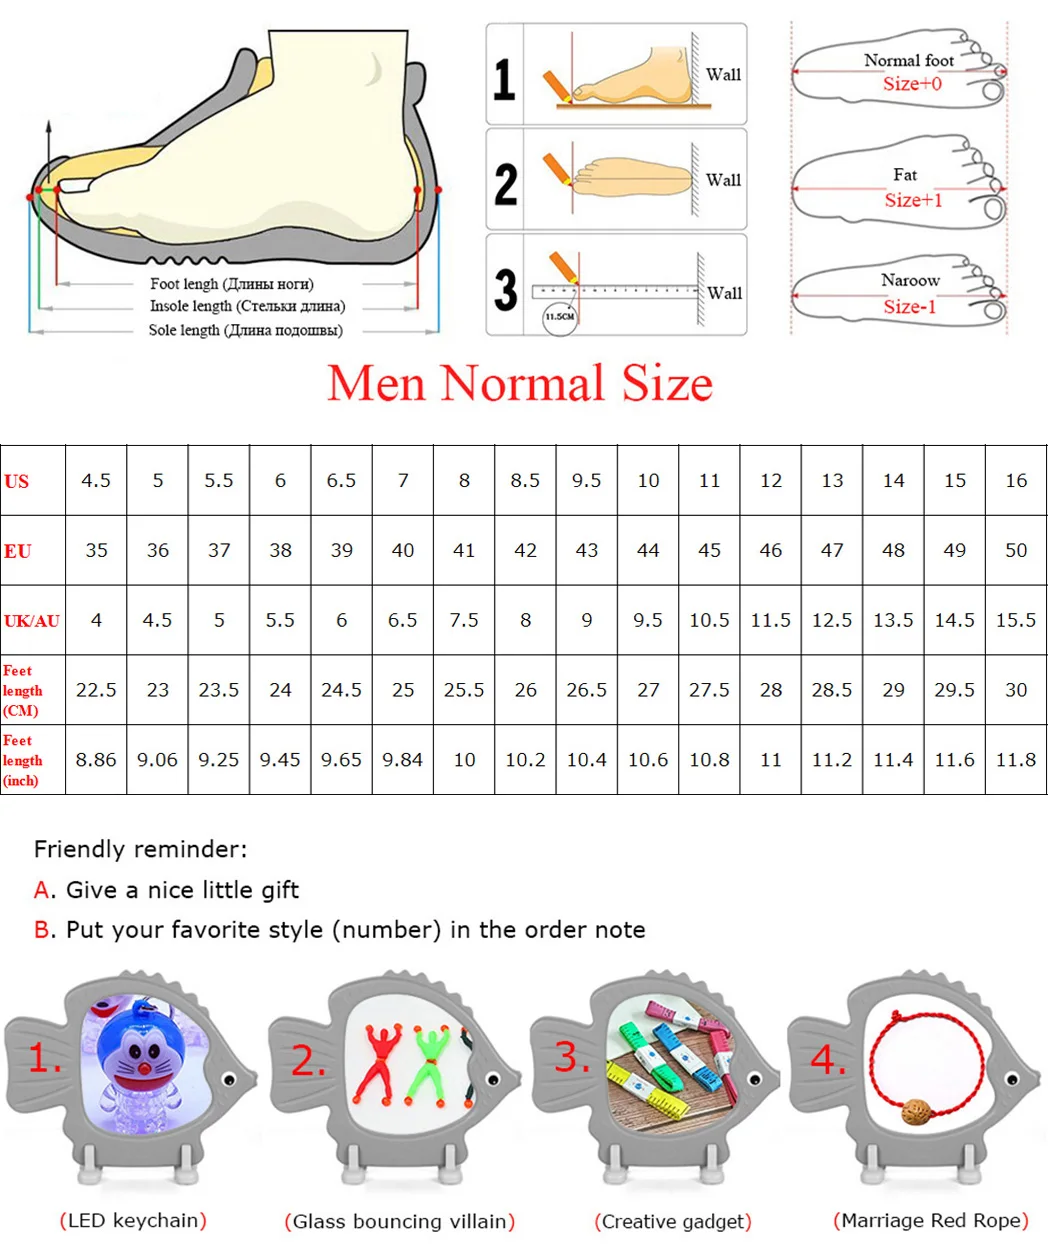 Home slippers men winter warm shoes new arrival indoor slippers male big size 49/50 zapatos de hombre